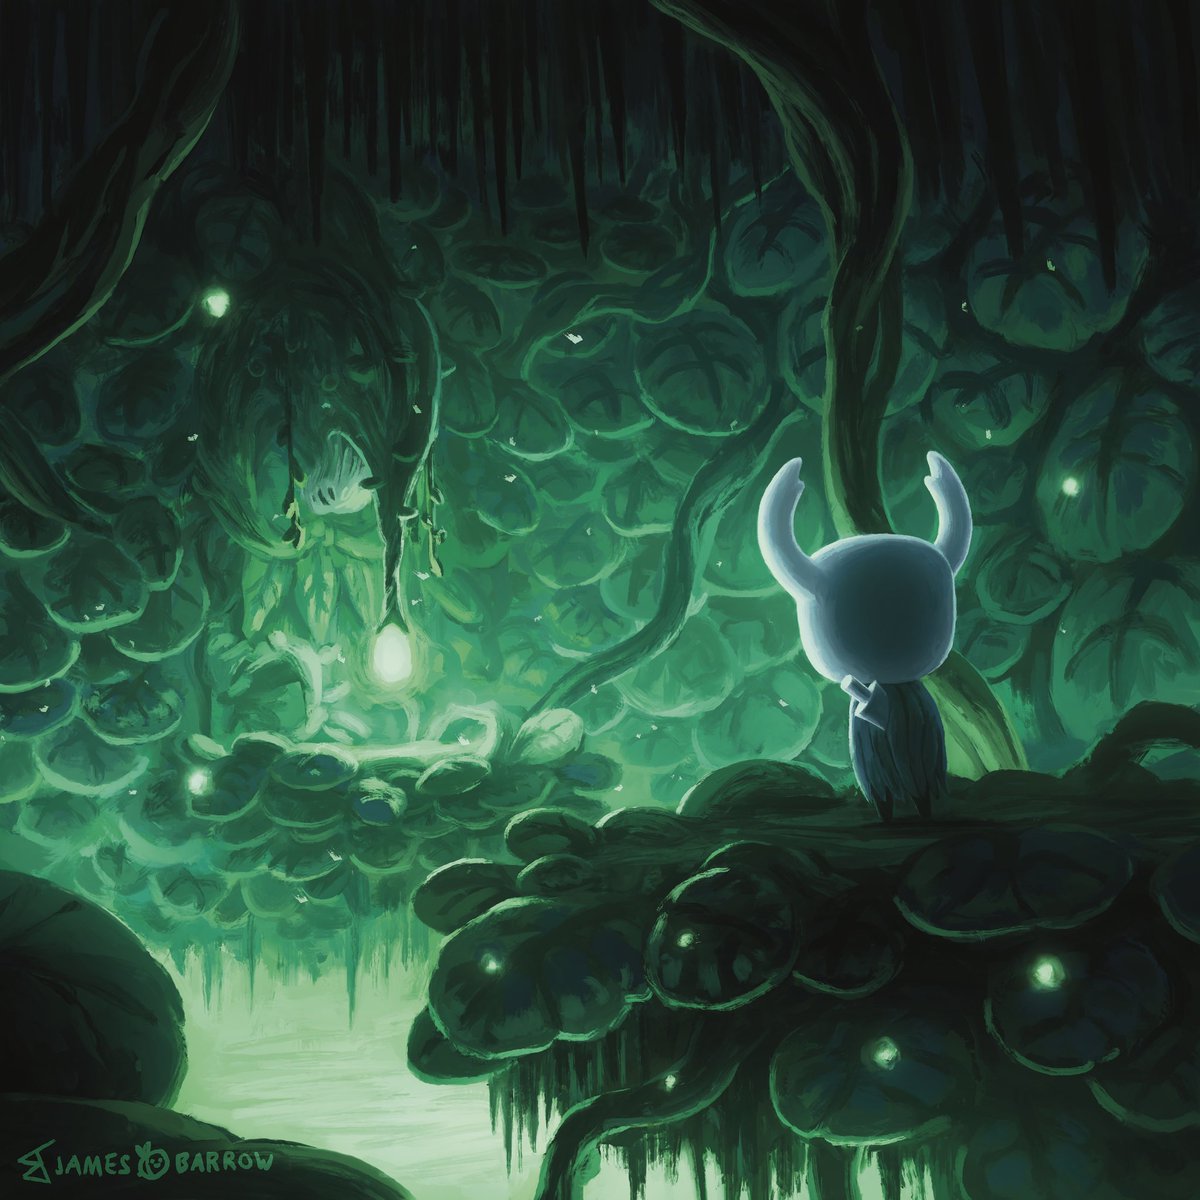 #HKAM24 Day 16: Isma’s Grove - From the lush foliage to the bubbling acid, I loved the vibe of this place.

#hollowknight #hollowknightart